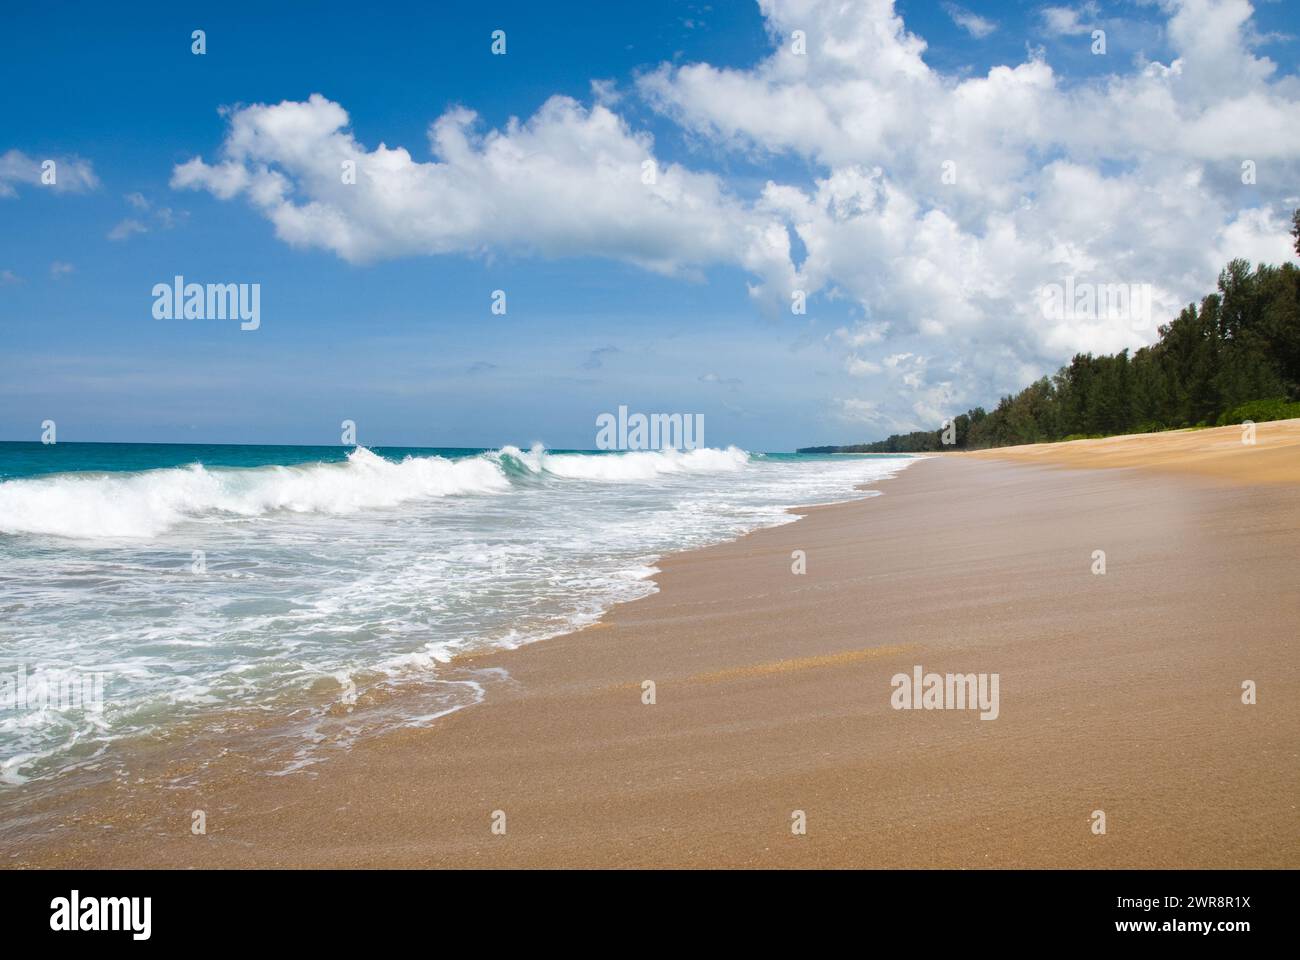 A beach with waves, trees on the shore, and sand Stock Photo